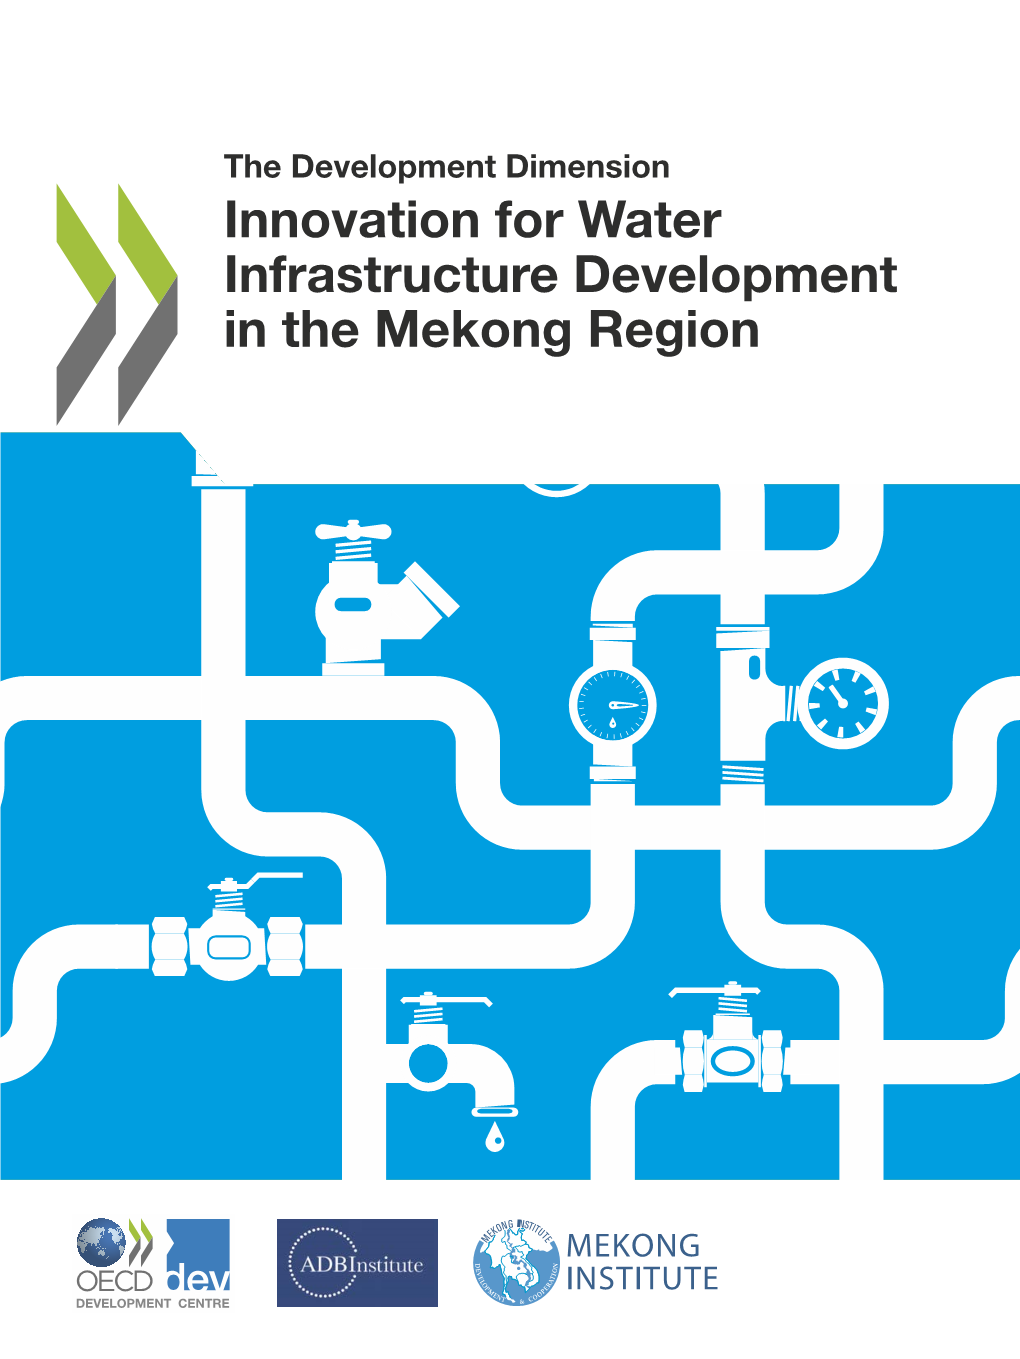 Innovation for Water Infrastructure Development in the Mekong Region